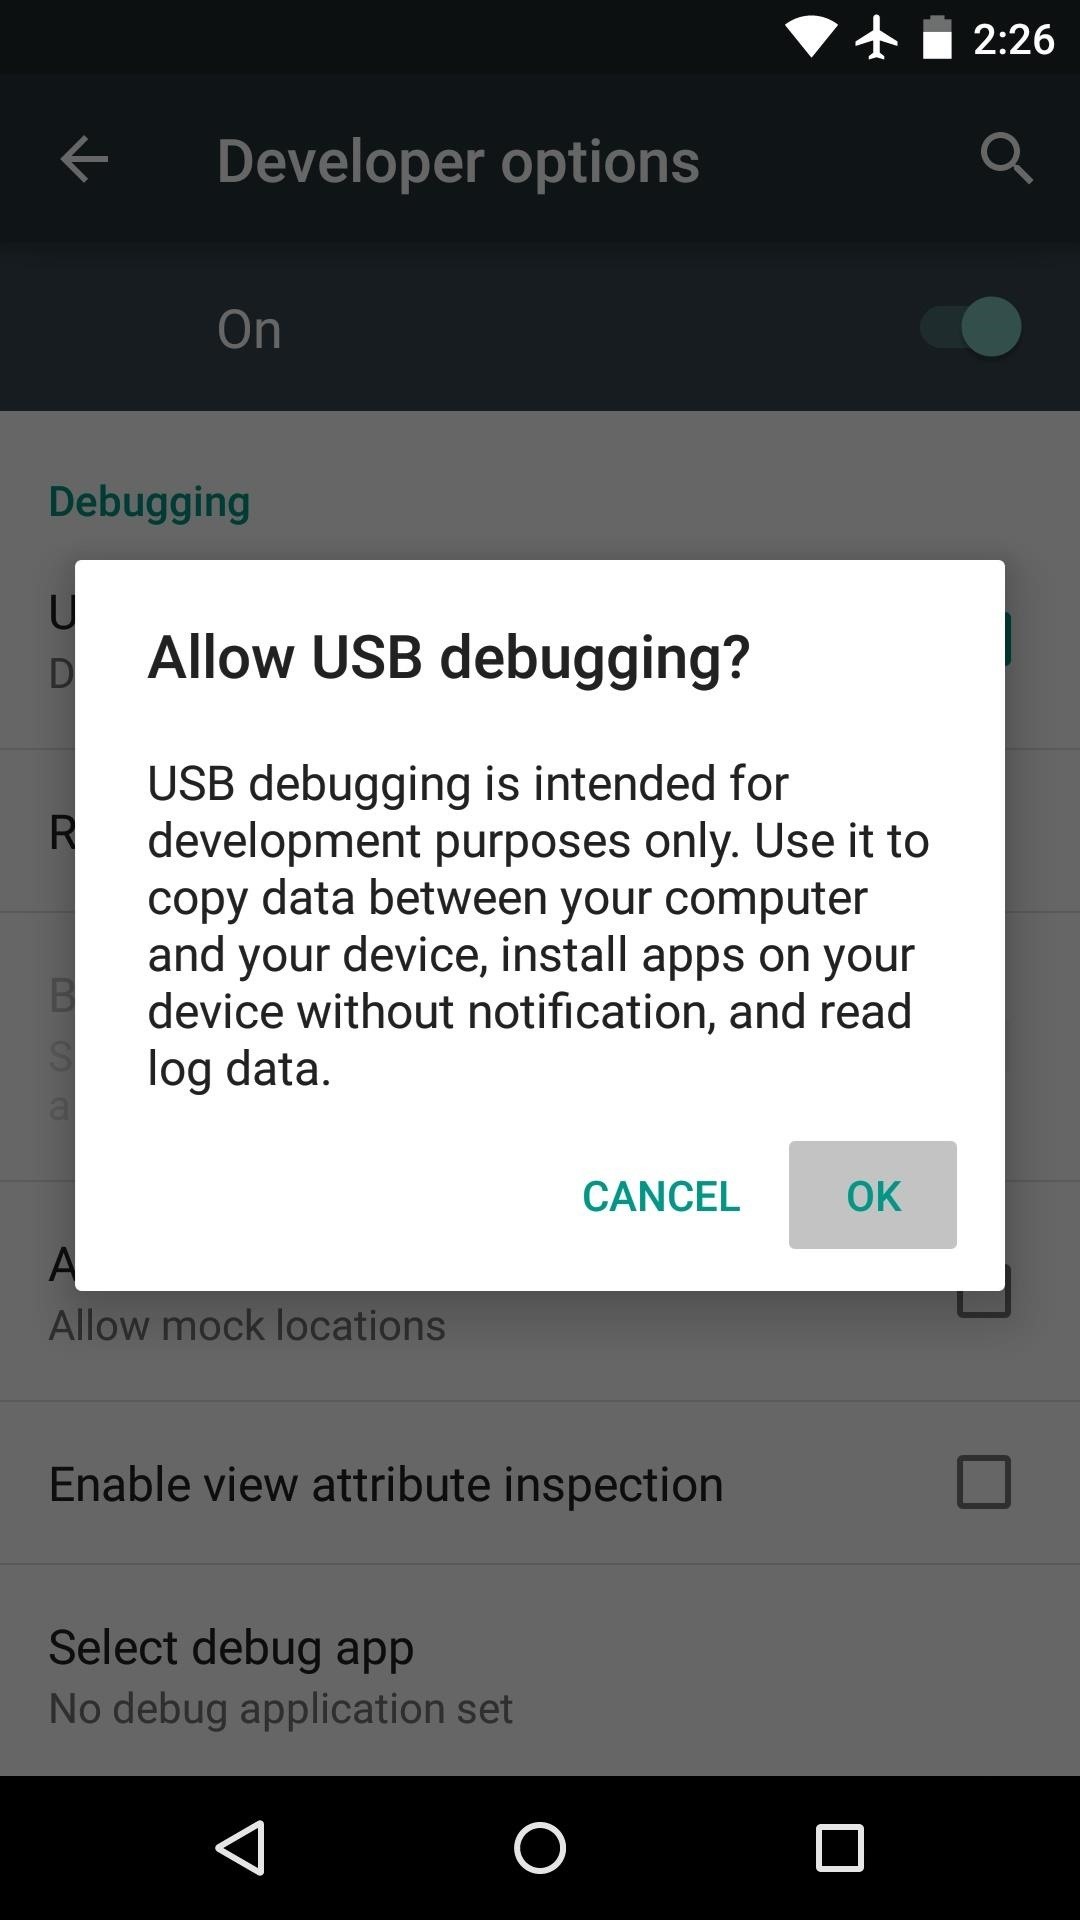 How to Root the New Android 5.0 Lollipop Preview on Your Nexus 5 or 7